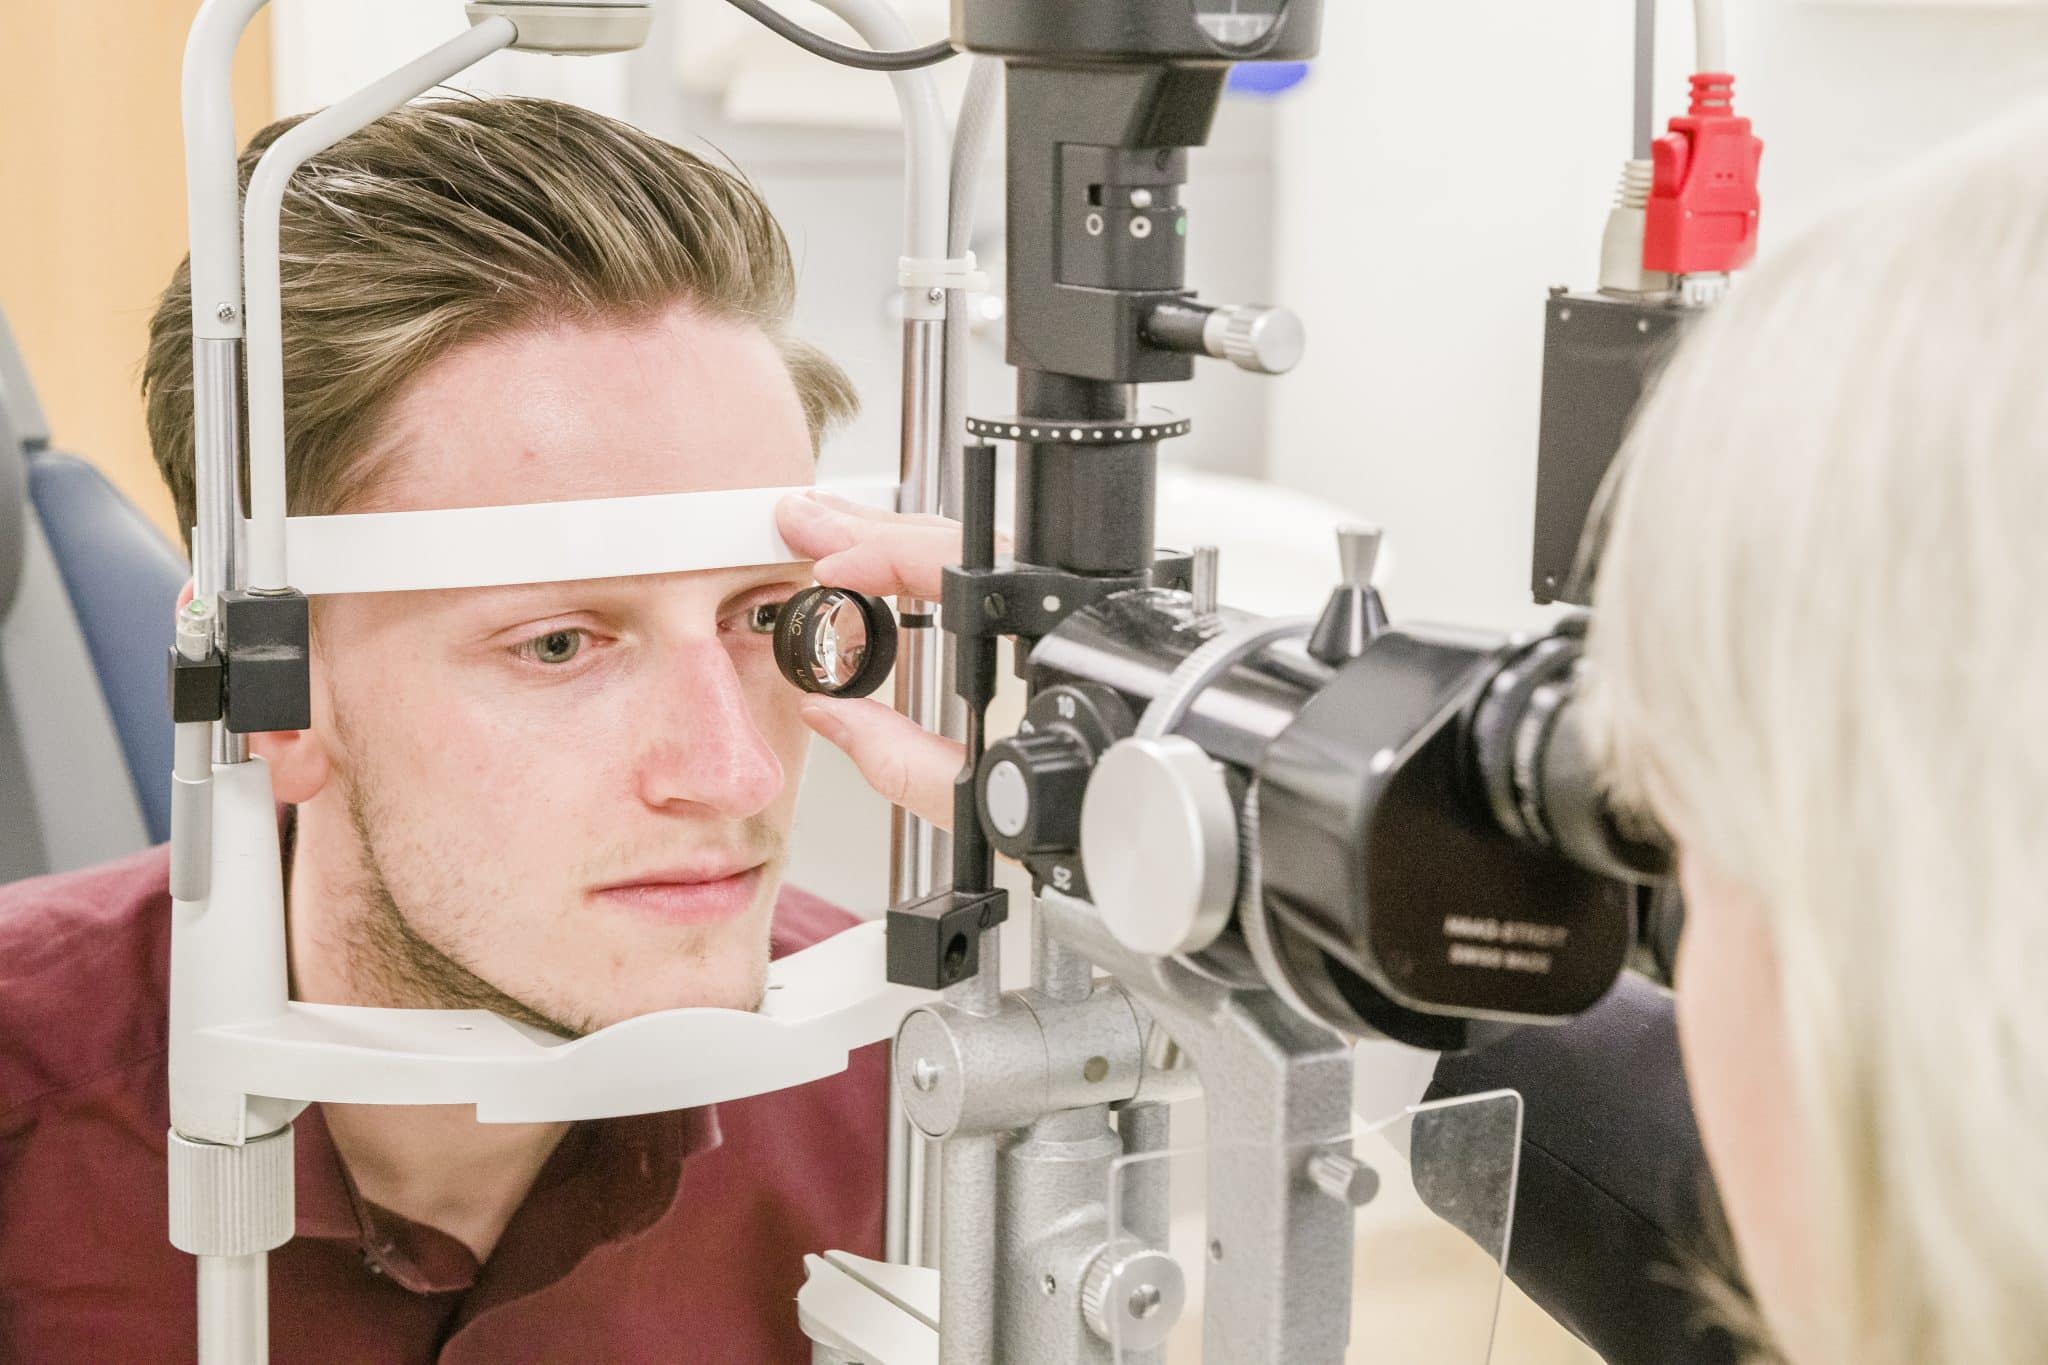 A man looking into an eye examination device